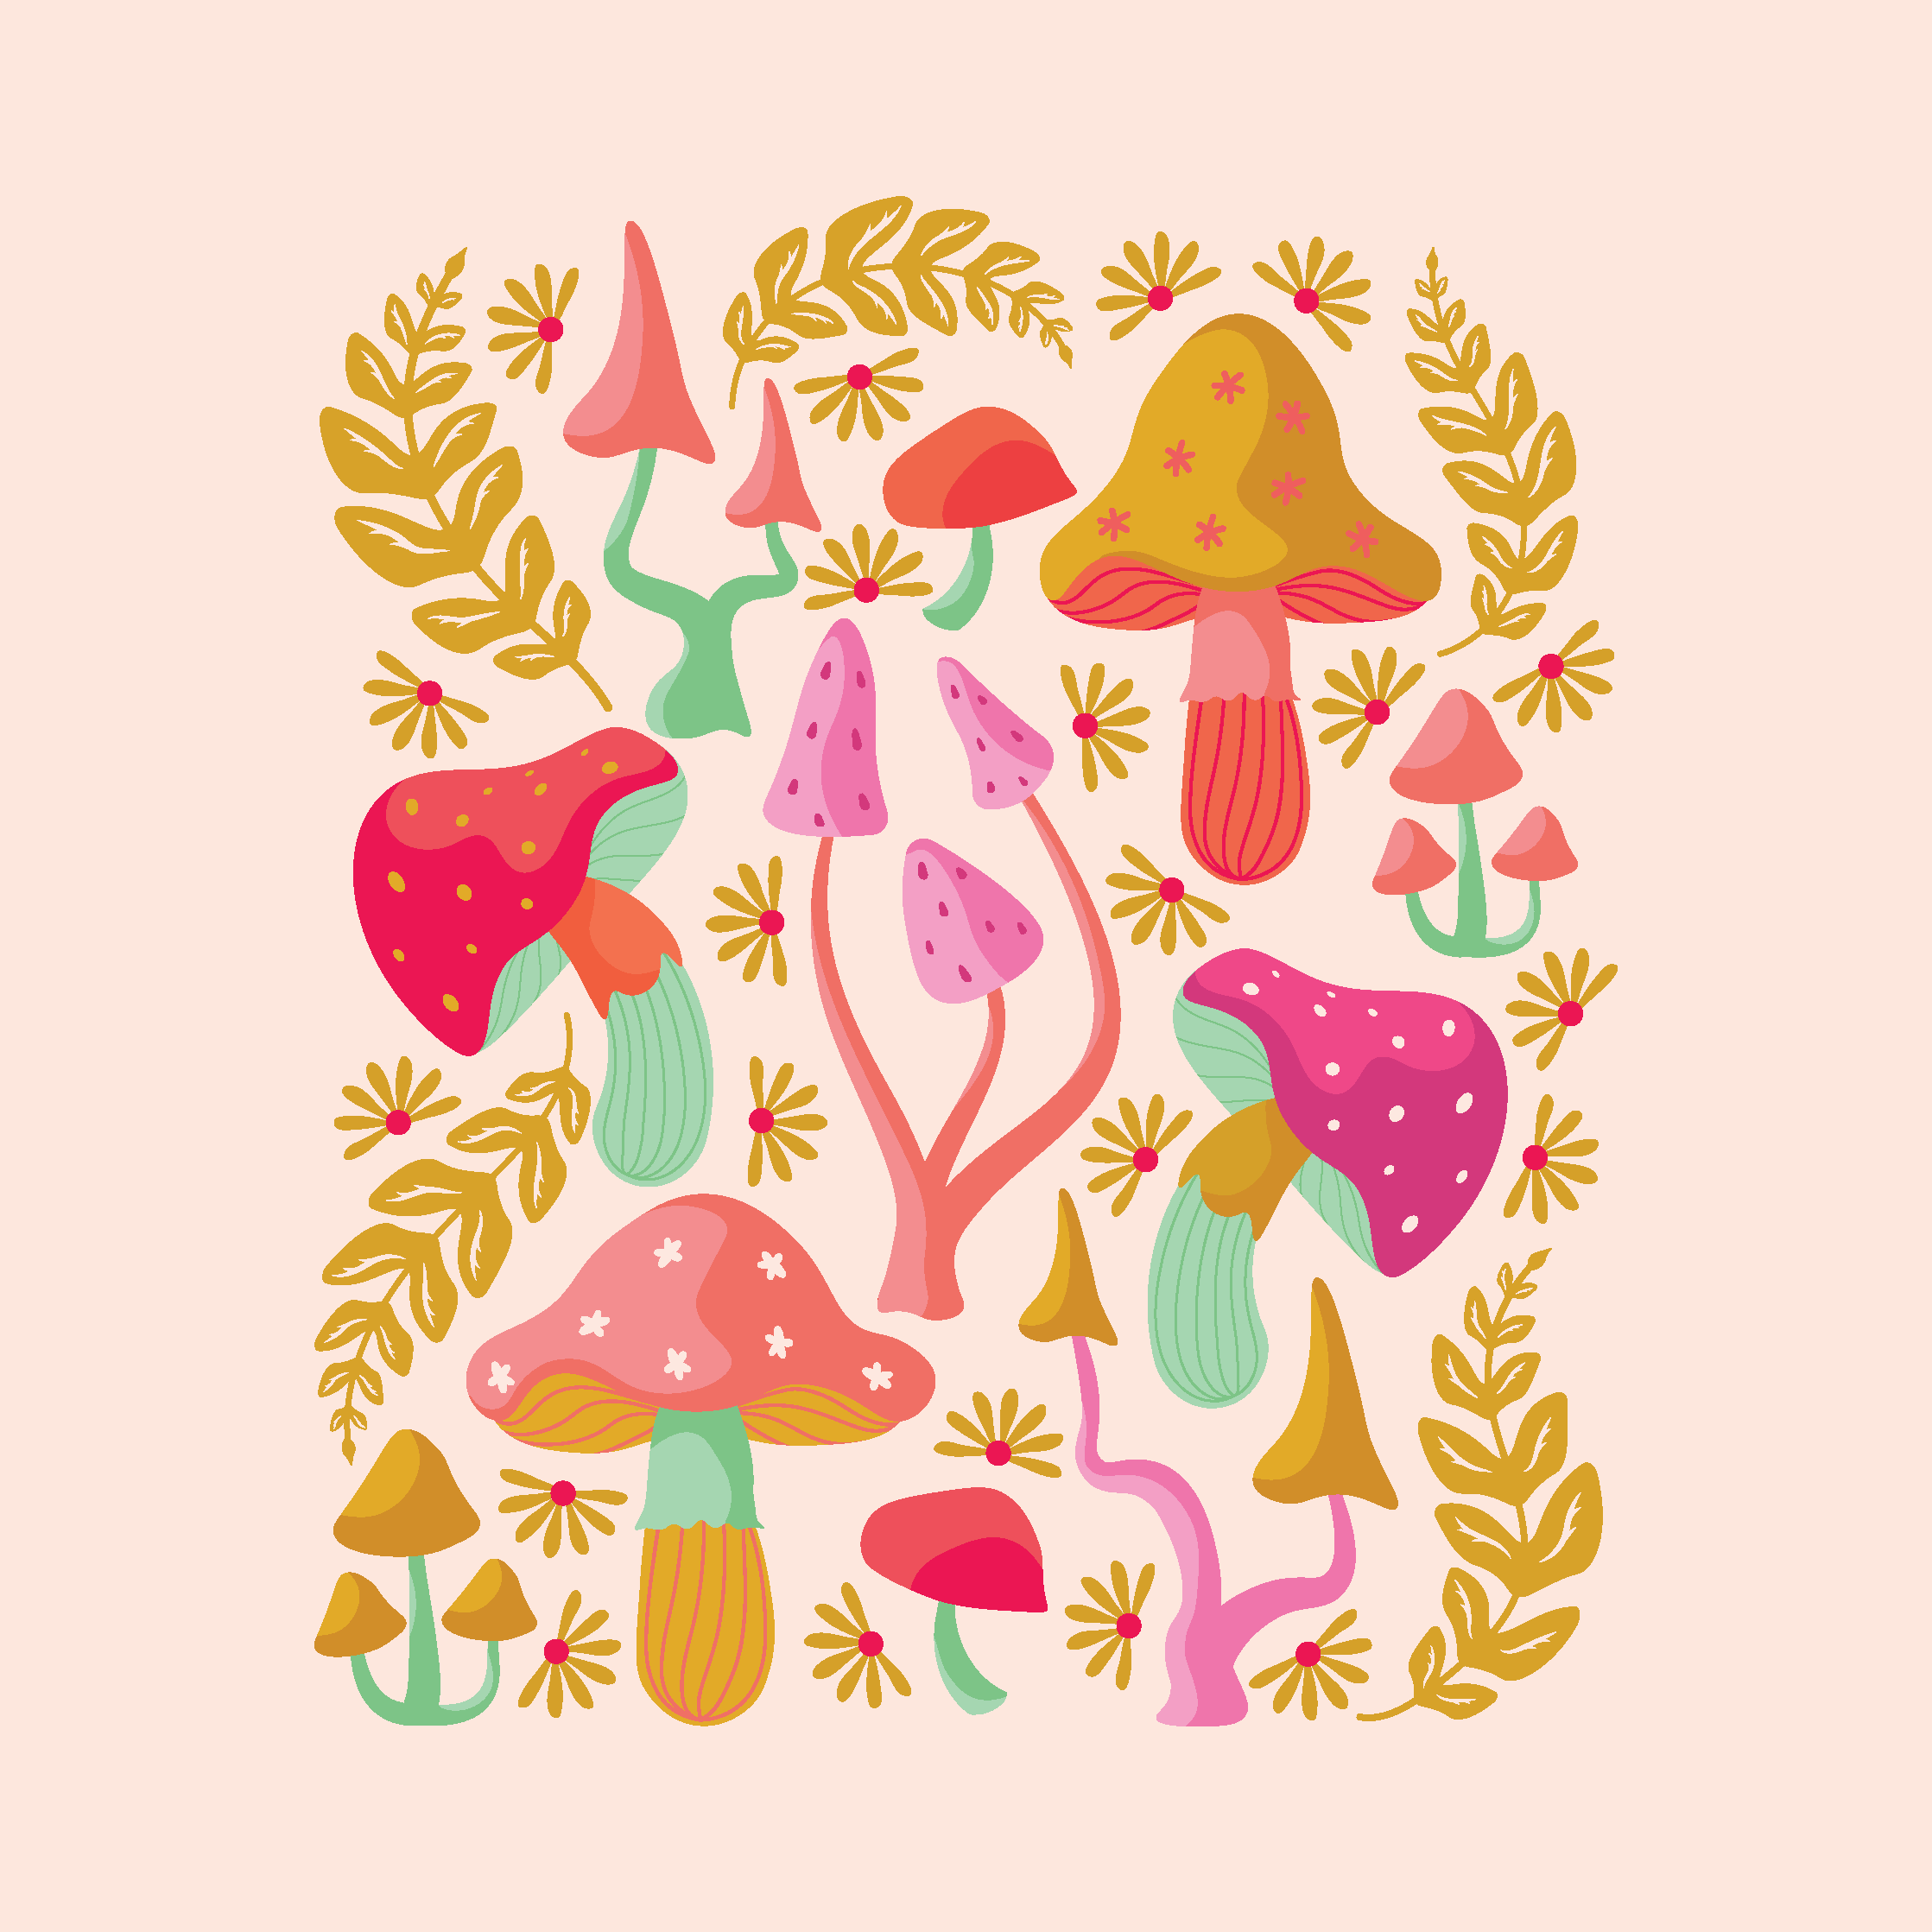 Colorful and Cute Dancing Mushrooms Illustration by Elivera Designs